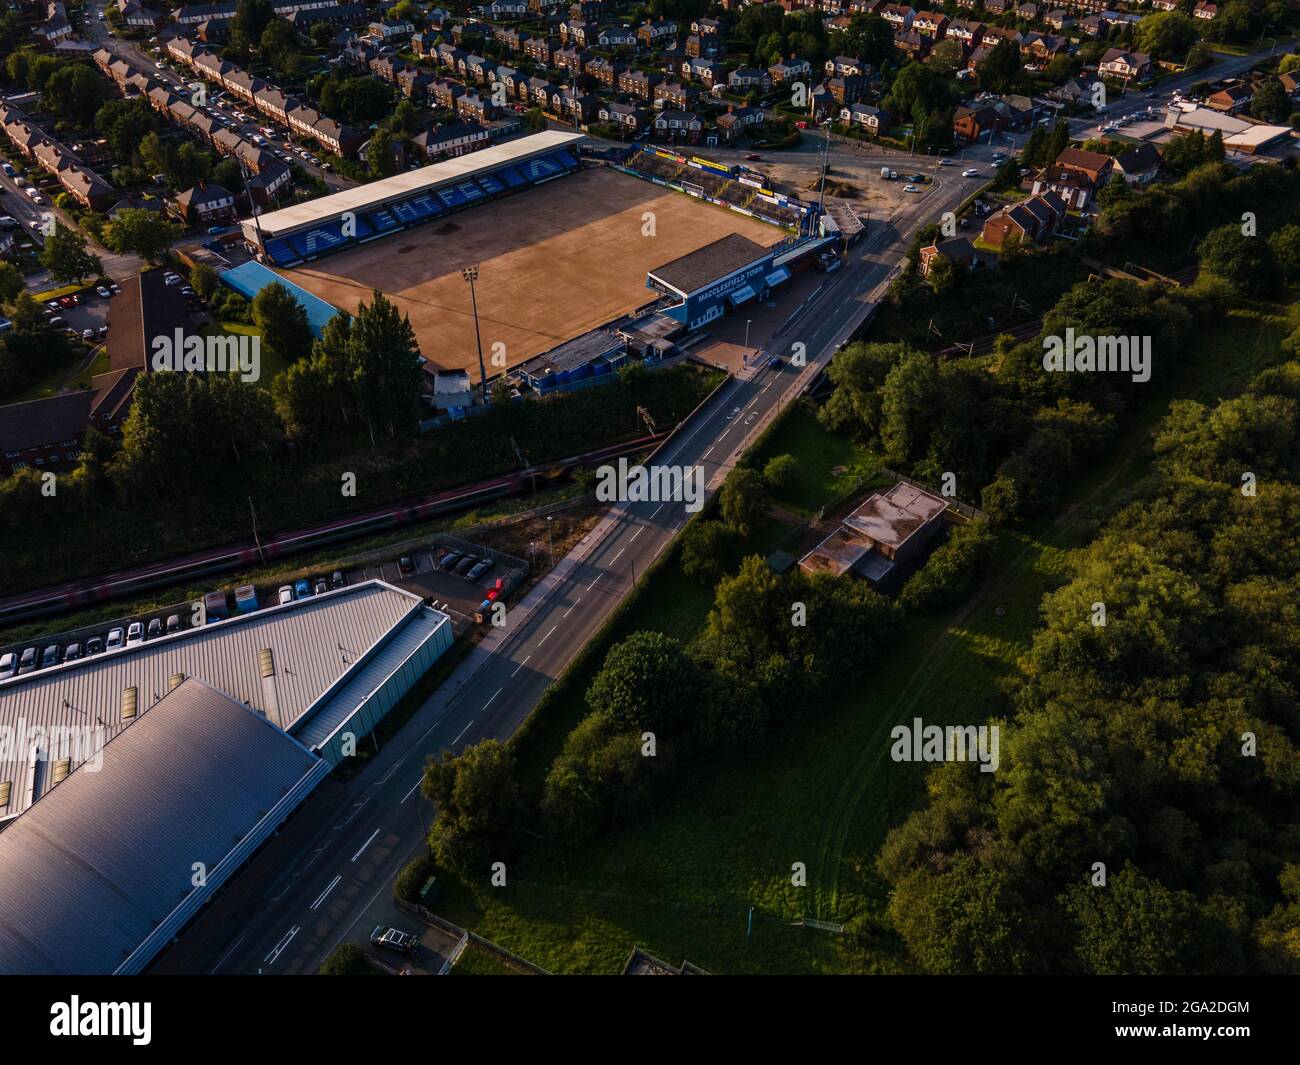 Macclesfield Town Football Club The Silkmen Aerial Drone Photo Photography Taken Just before the Club was forced to Fold Stock Photo